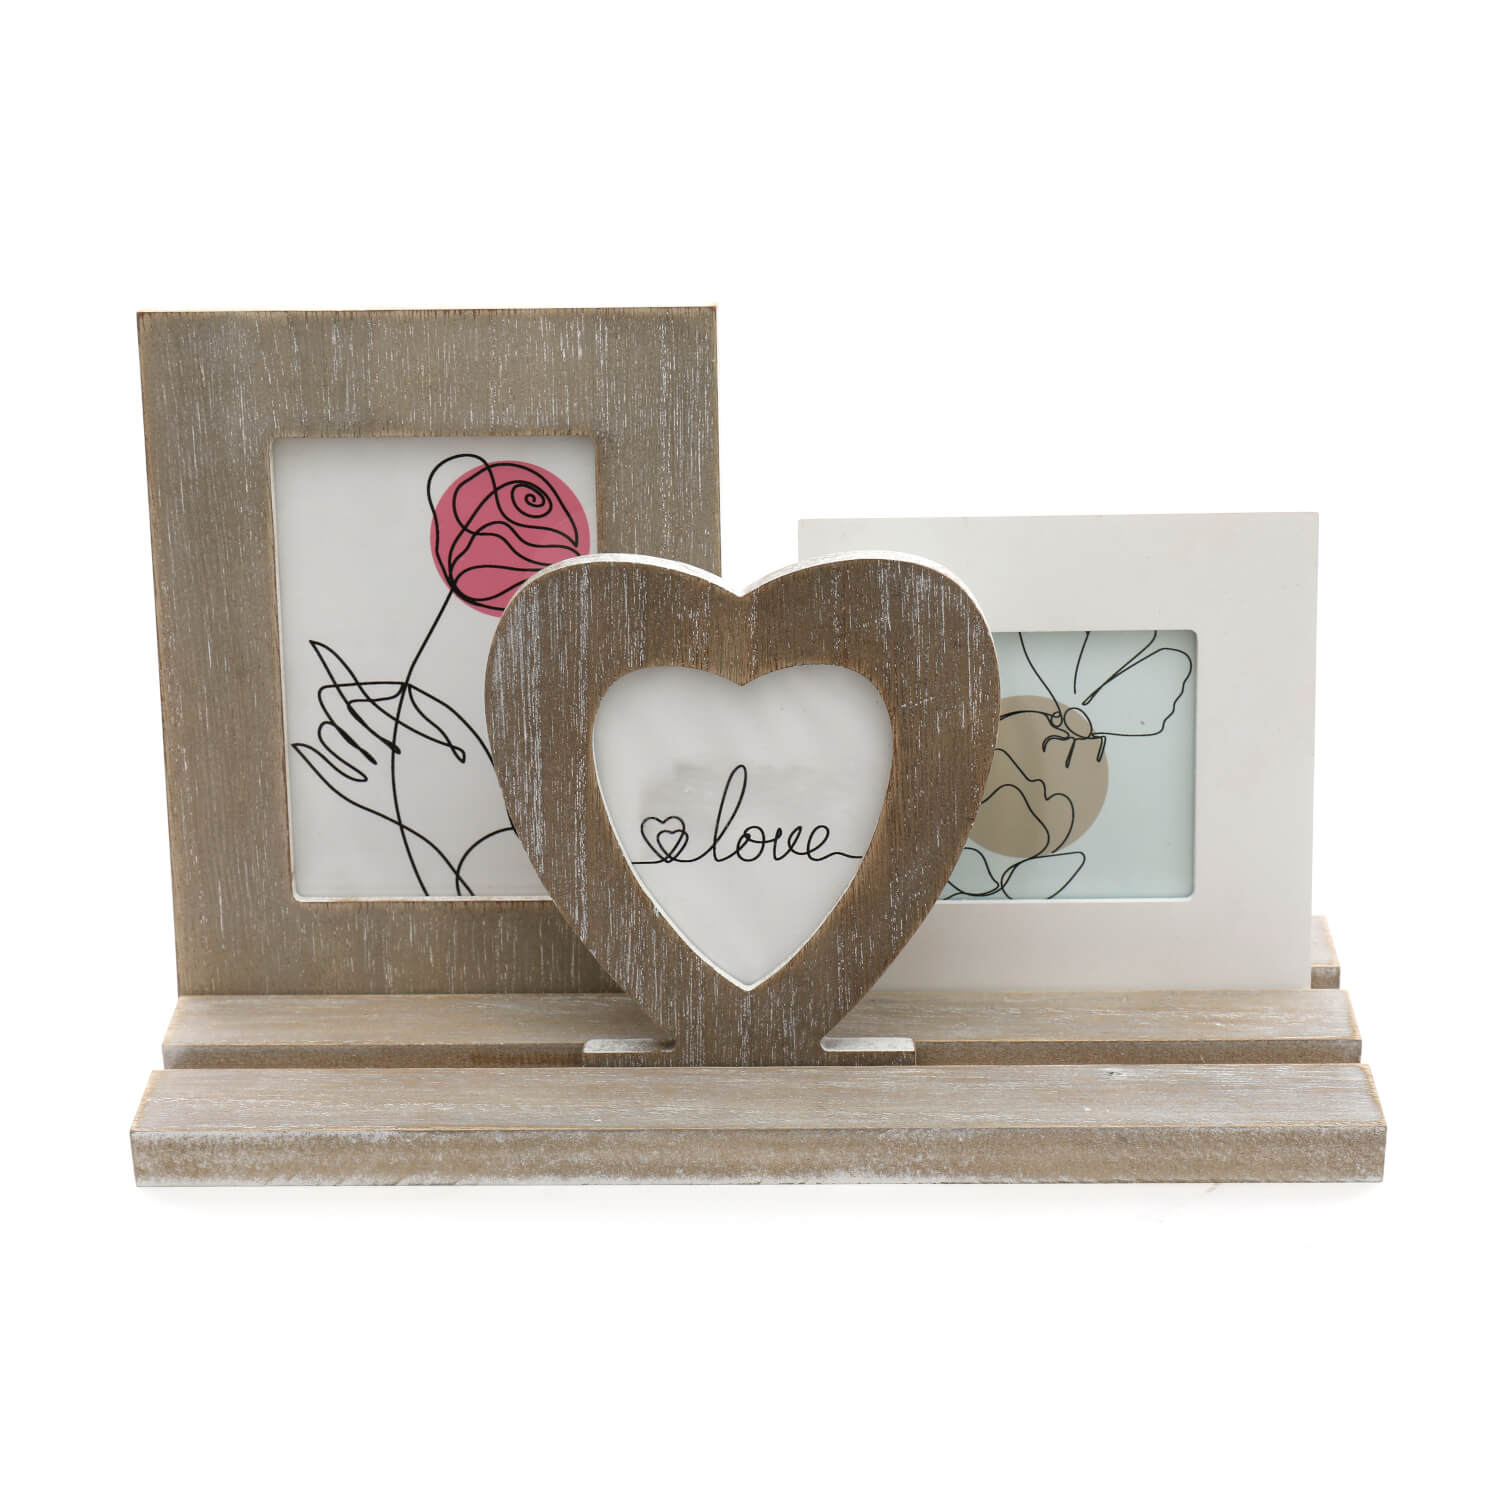 The Home Rustic Frames Set 1 Shaws Department Stores